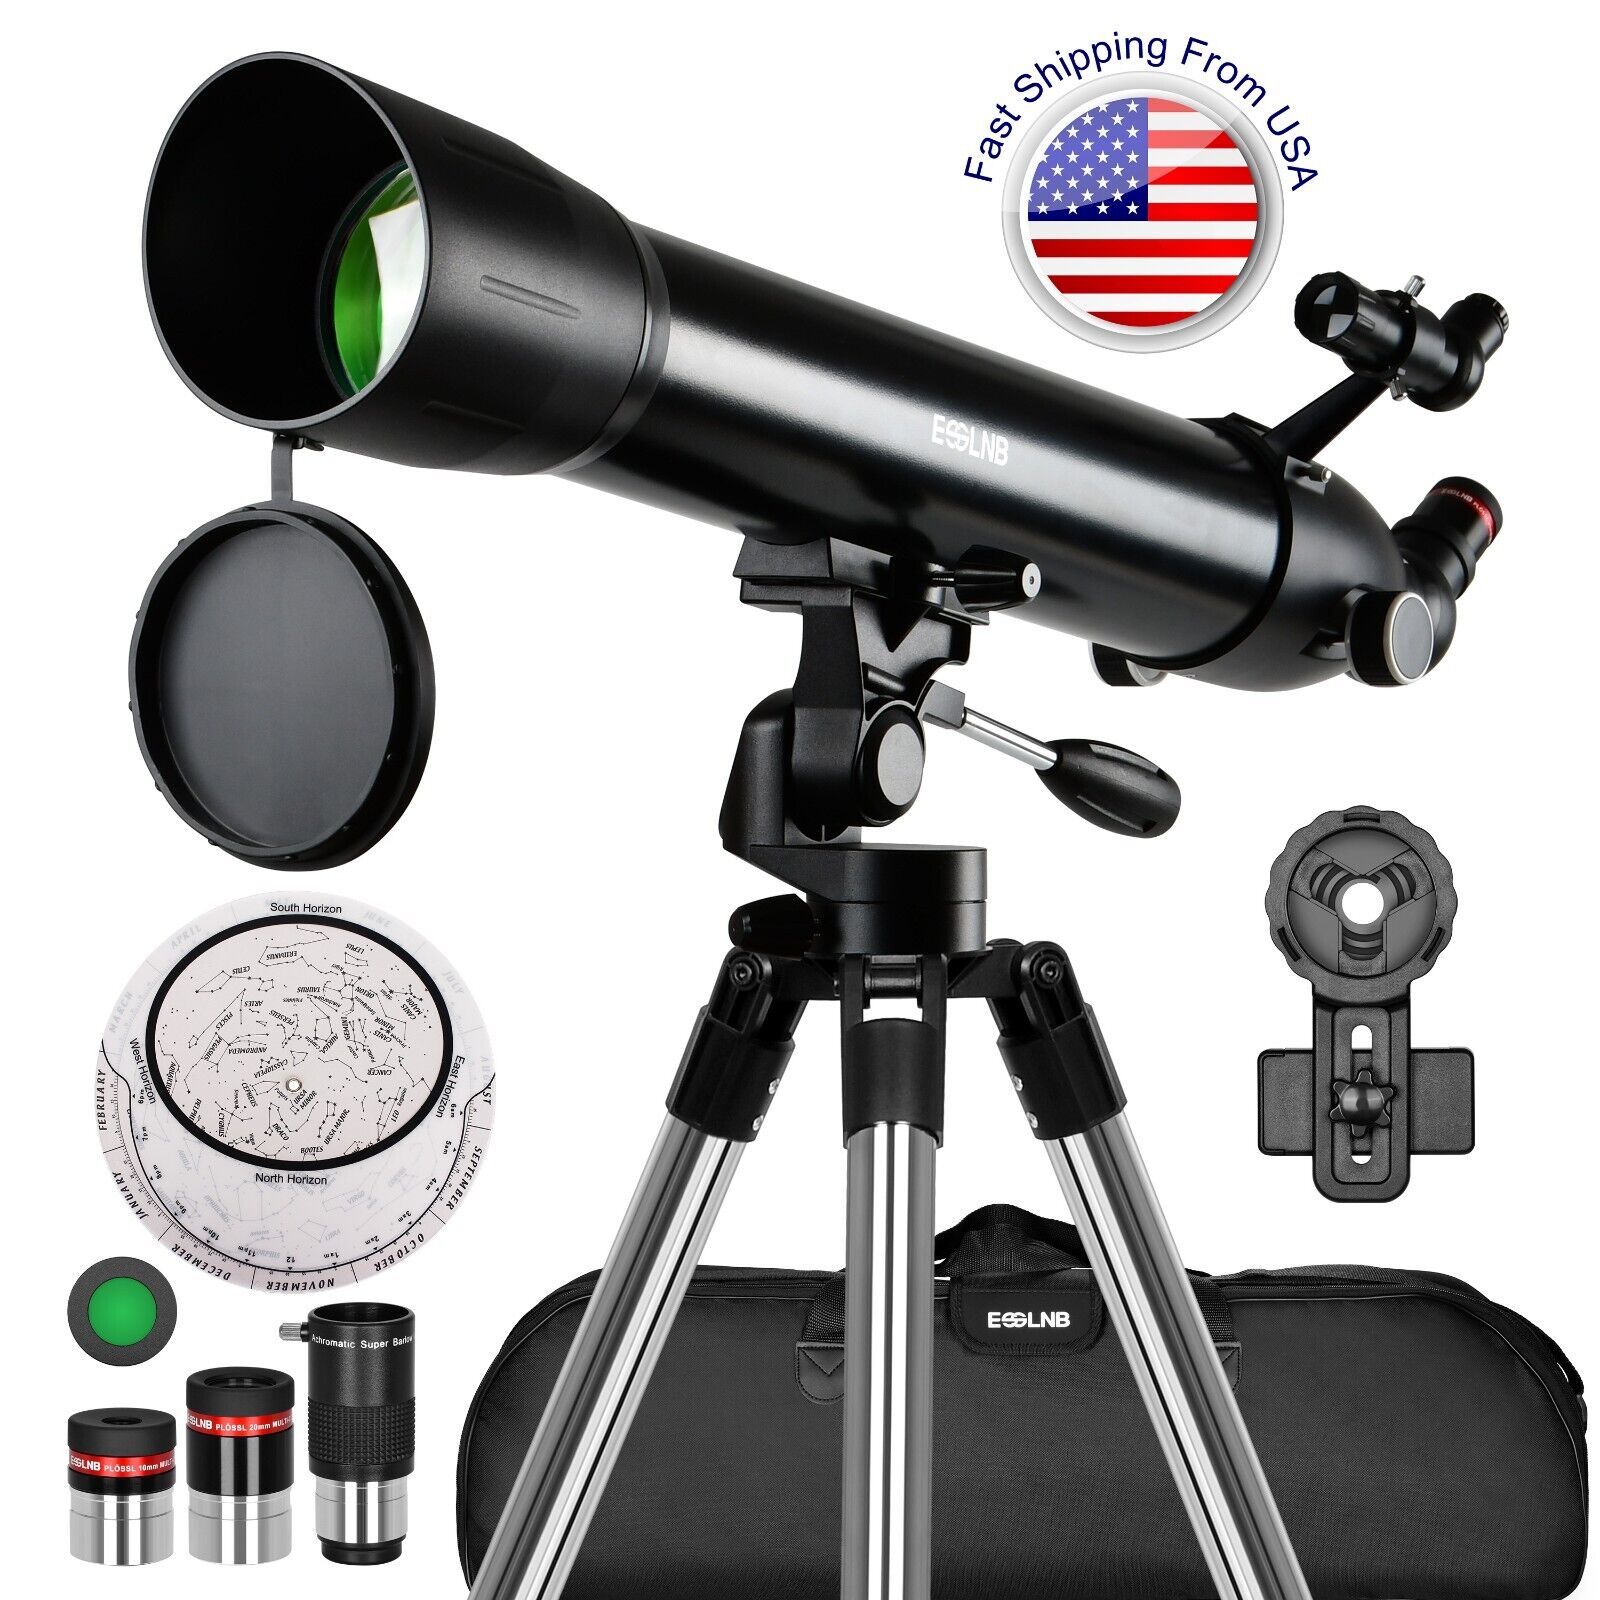 210X Telescope High Power for Moon Watching with Mobile Holder Carrying Bag Gift